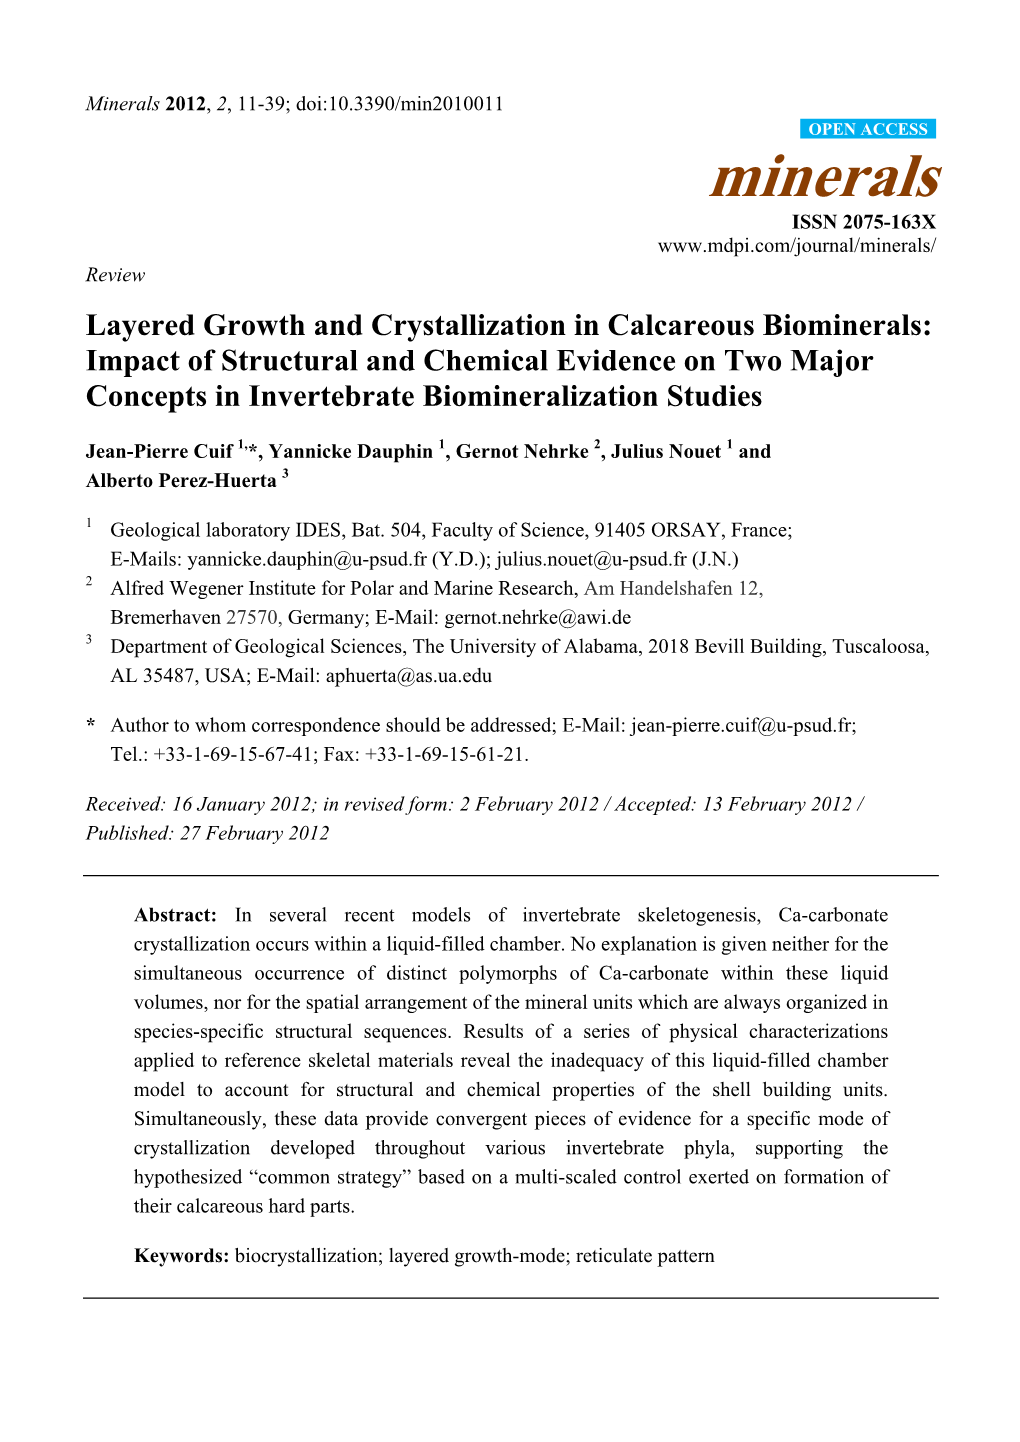 Layered Growth and Crystallization in Calcareous Biominerals: Impact Of